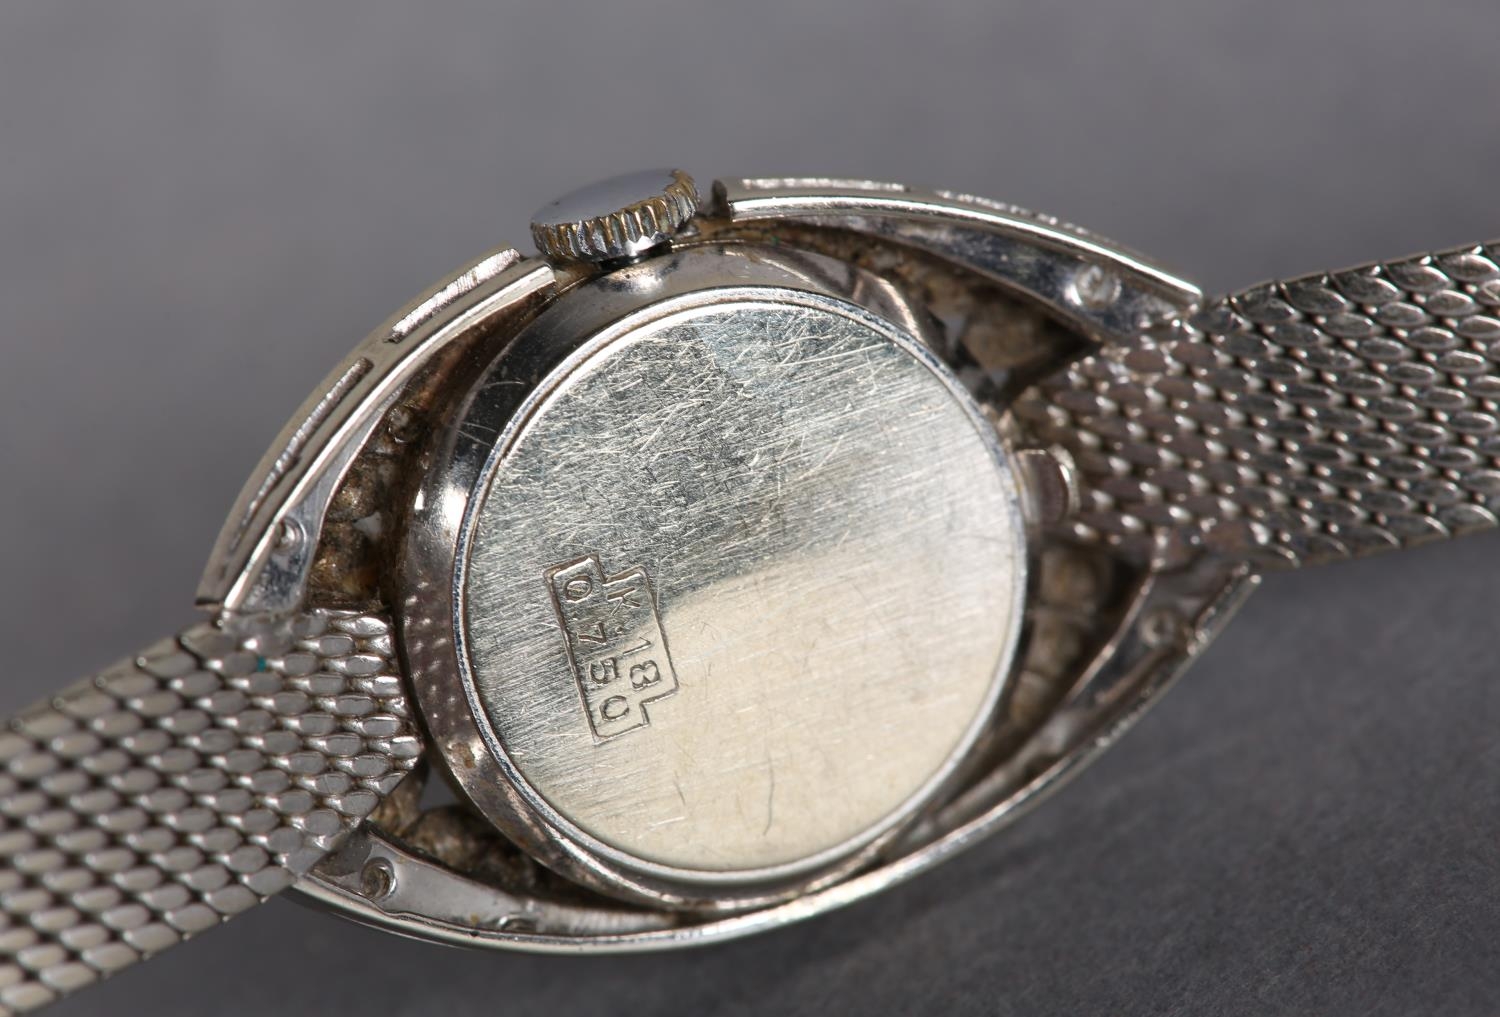 AN OMEGA LADY'S DIAMOND COCKTAIL WRISTWATCH, c.1965, 17 jewelled 484 movement No. 22672309, silvered - Image 4 of 4